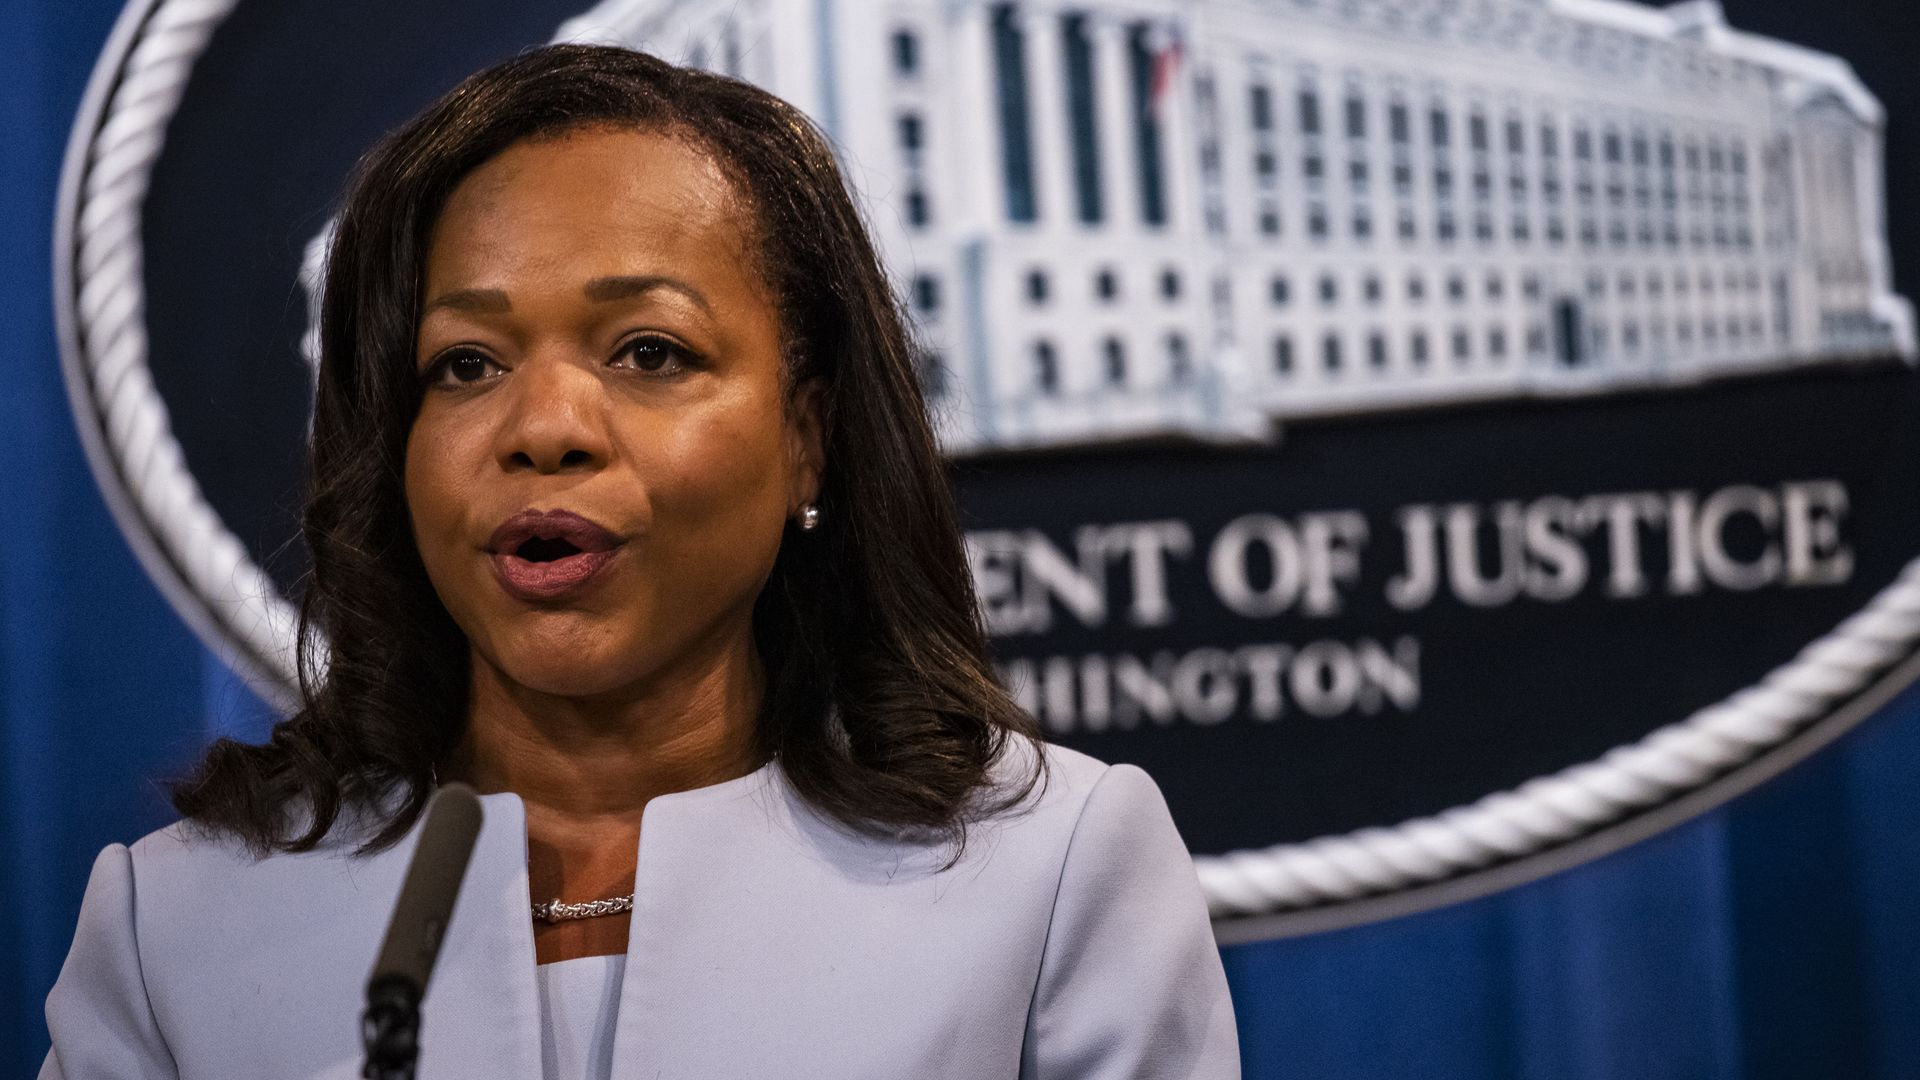 Kristen Clarke, assistant U.S. attorney general for civil rights, speaks during a news conference at the Department of Justice in Washington, D.C.